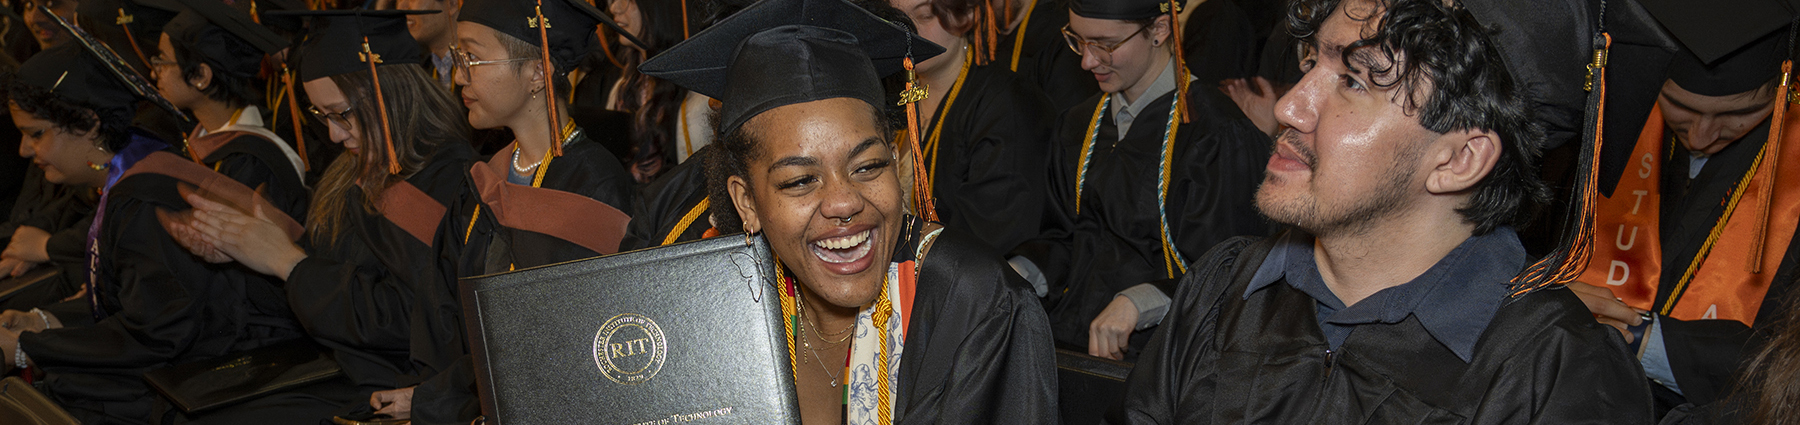 Students smile during commencement.